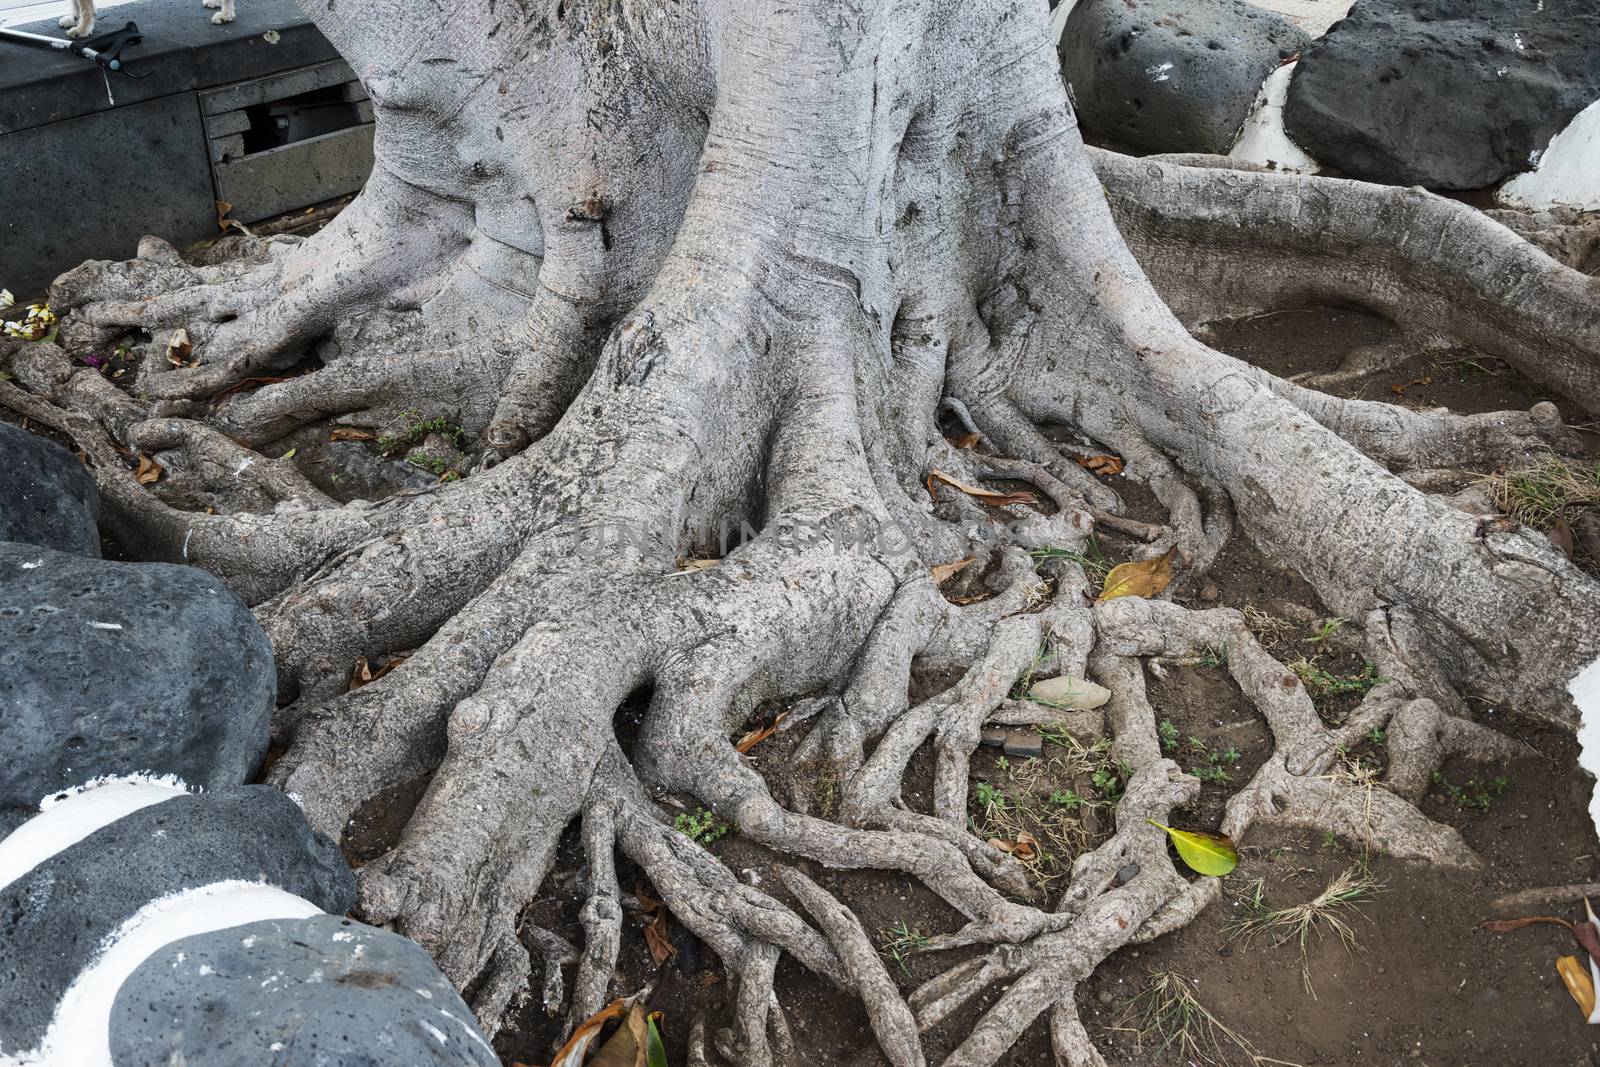 Amazing bare tree roots on the ground close up photo